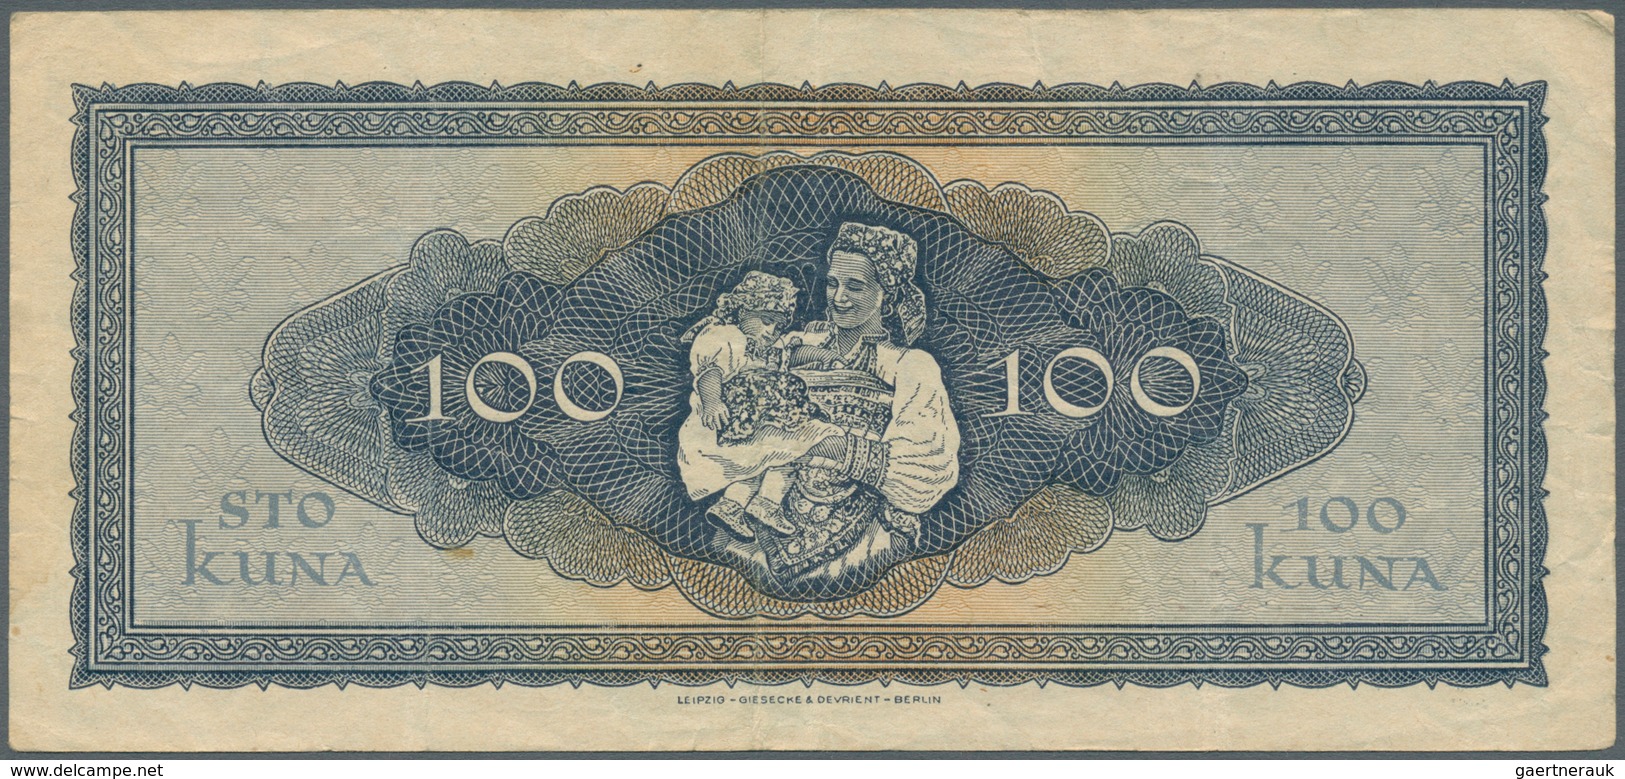 02930 Alle Welt: Collection with 200 Banknotes from all over the world with doublets and some better items